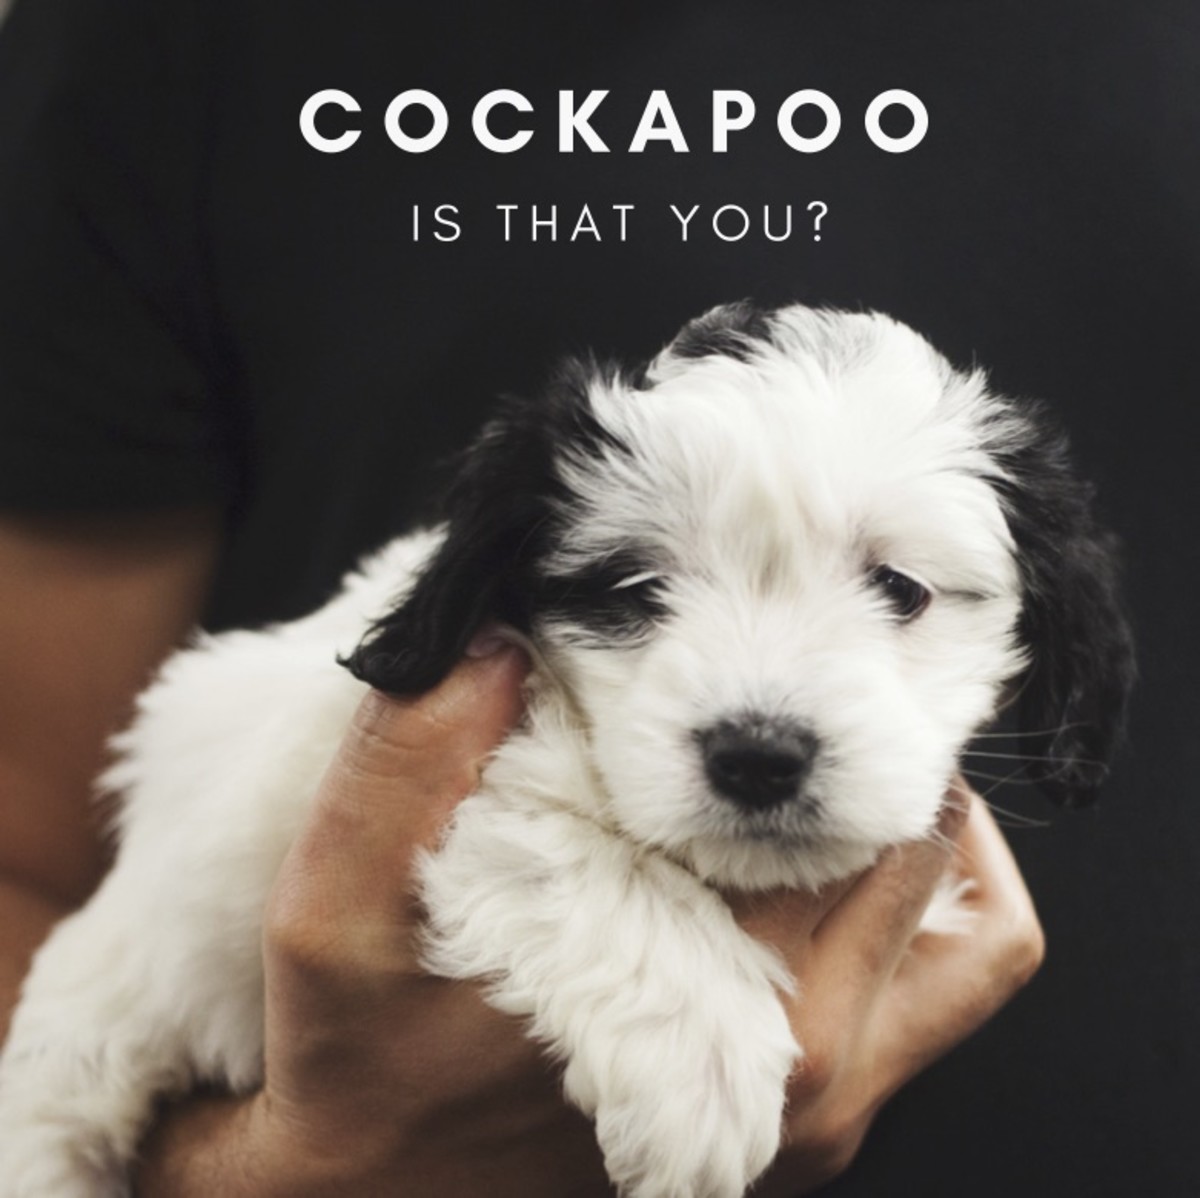 The Cockapoo originates from the Cocker Spaniel and the Poodle (miniature or toy).